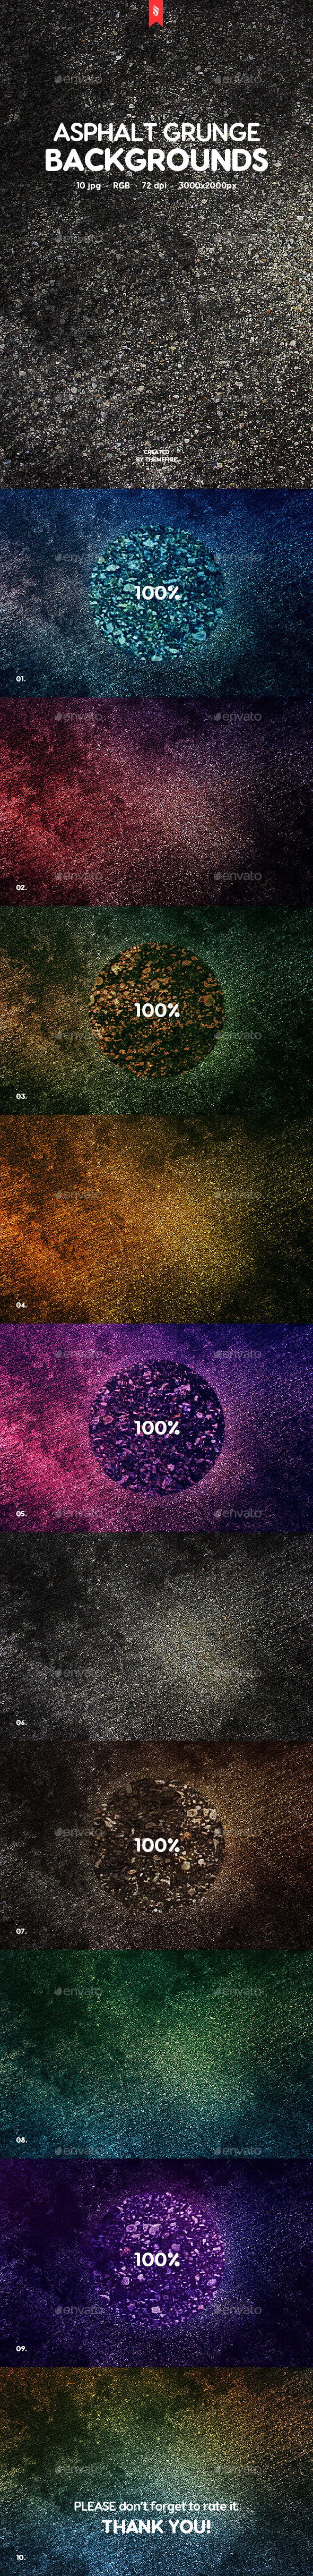 Asphalt Grunge Backgrounds by themefire | GraphicRiver